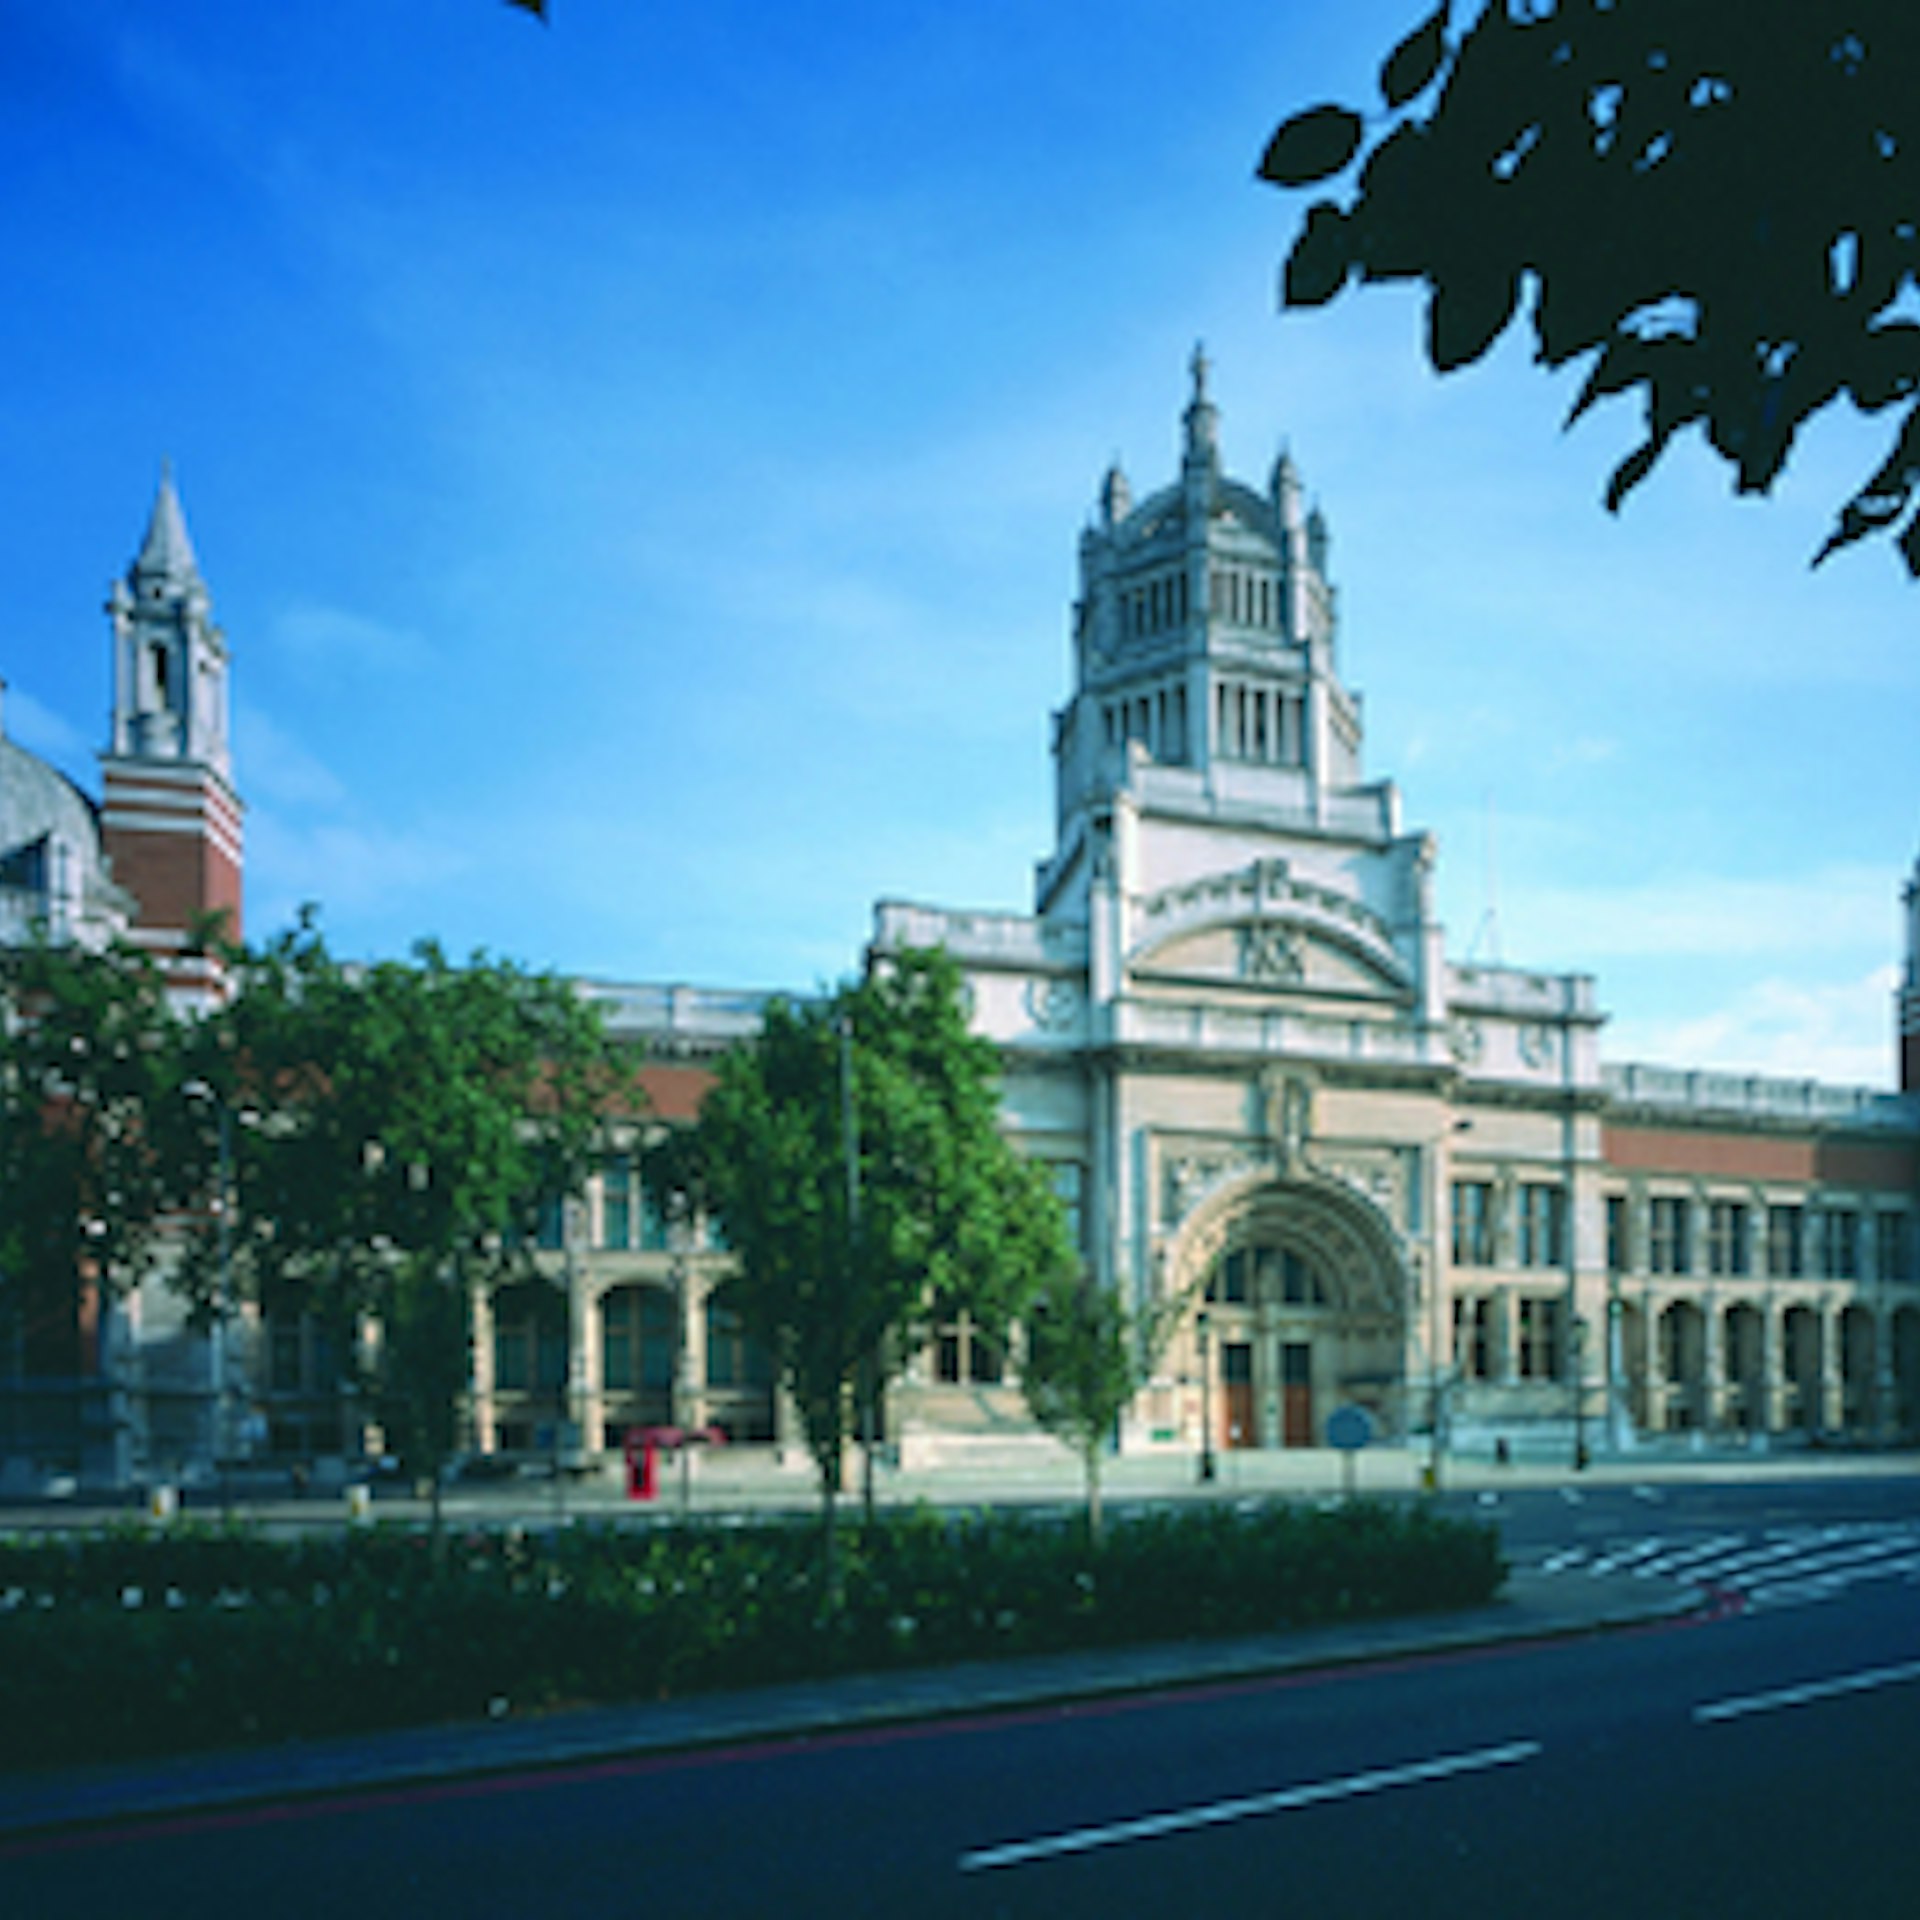 V&A  Museums in South Kensington, London